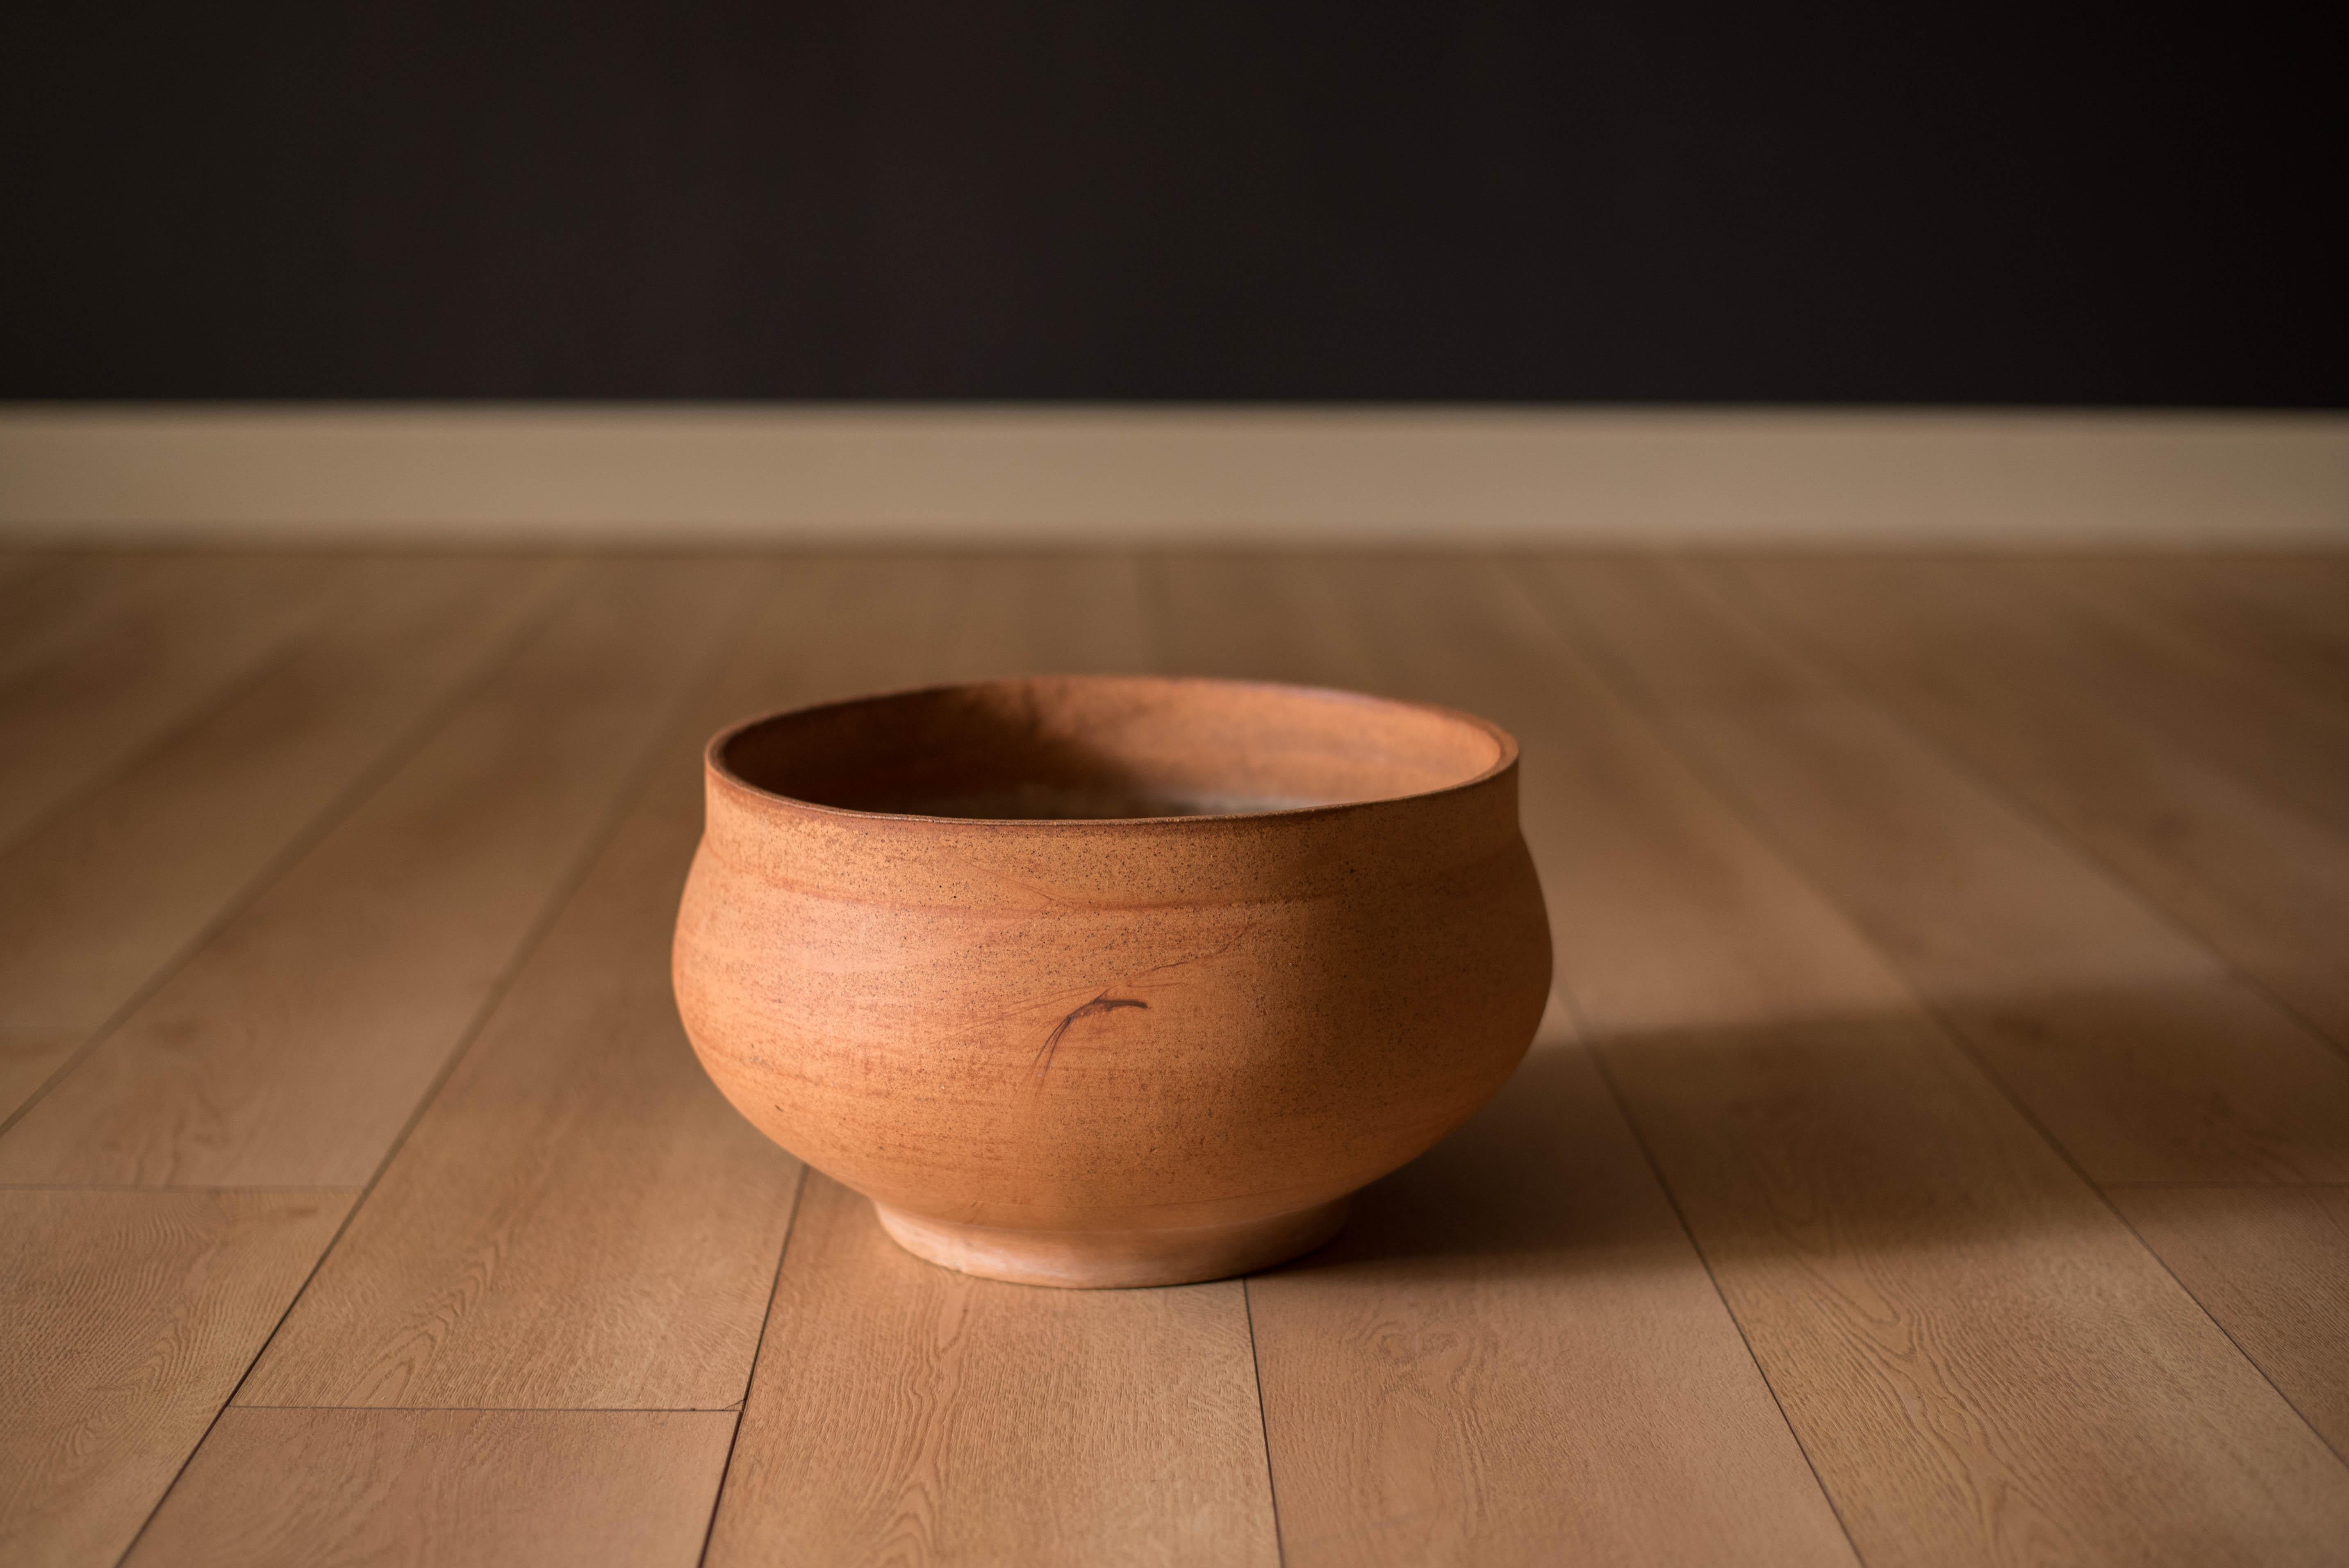 Mid-Century Modern ceramic planter pot designed by David Cressey for Architectural Pottery Pro/Artisan. This hand poured stoneware vessel features a mixture of natural clay earth tones fired with an unglazed textural finish and distinctive markings.